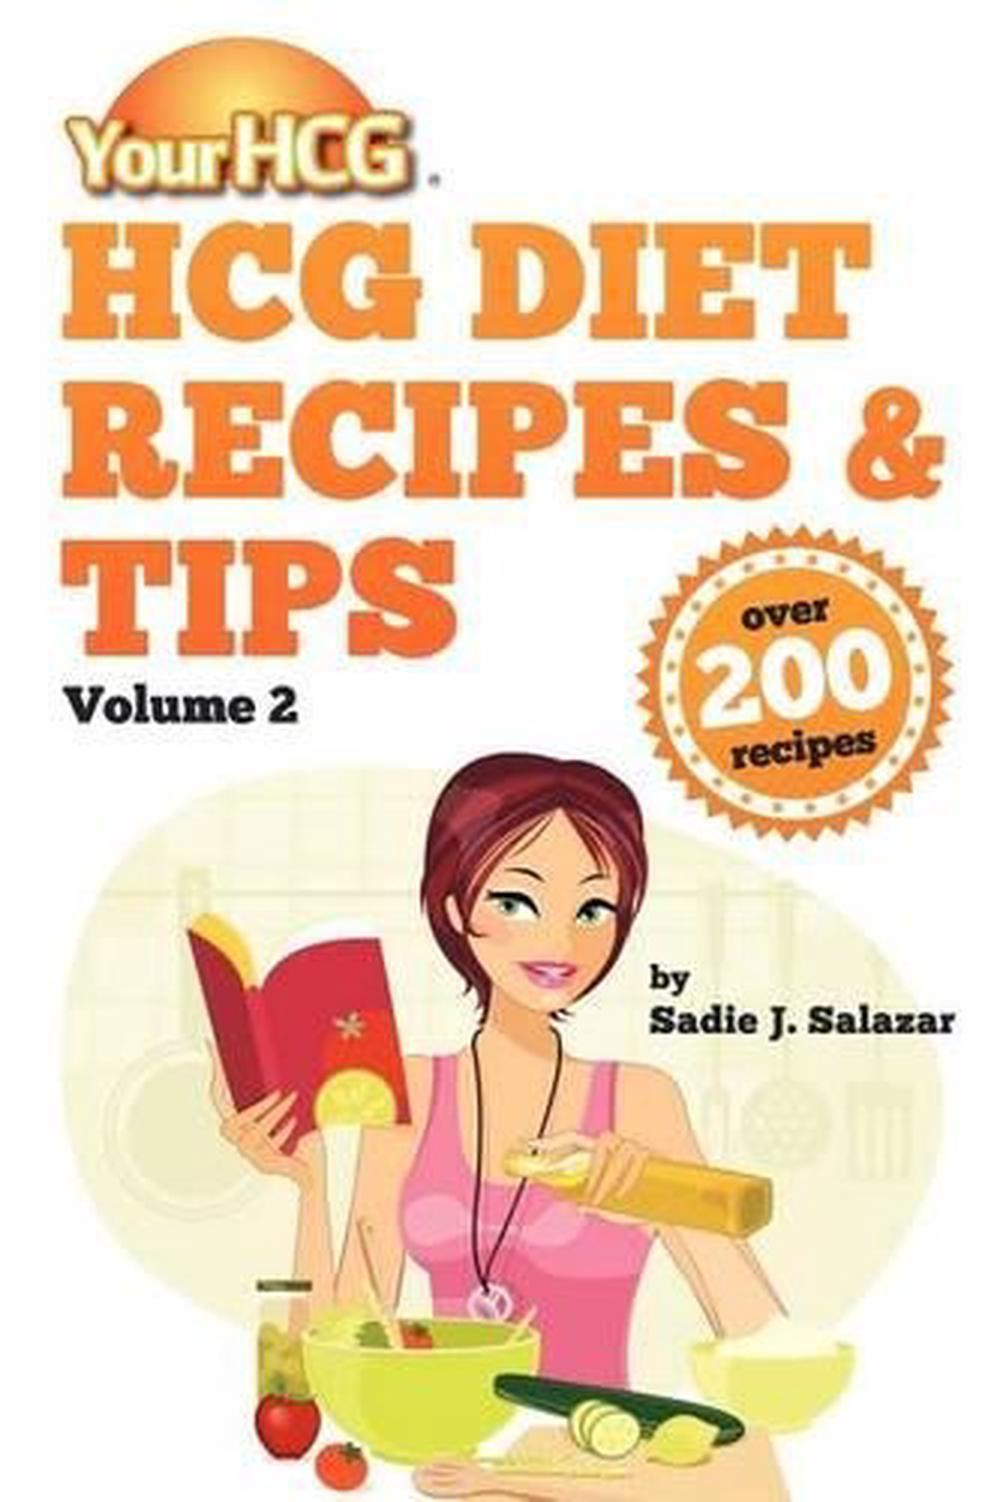 Your Hcg Diet Recipes & Tips, Volume 2 by Sadie J. Salazar (English